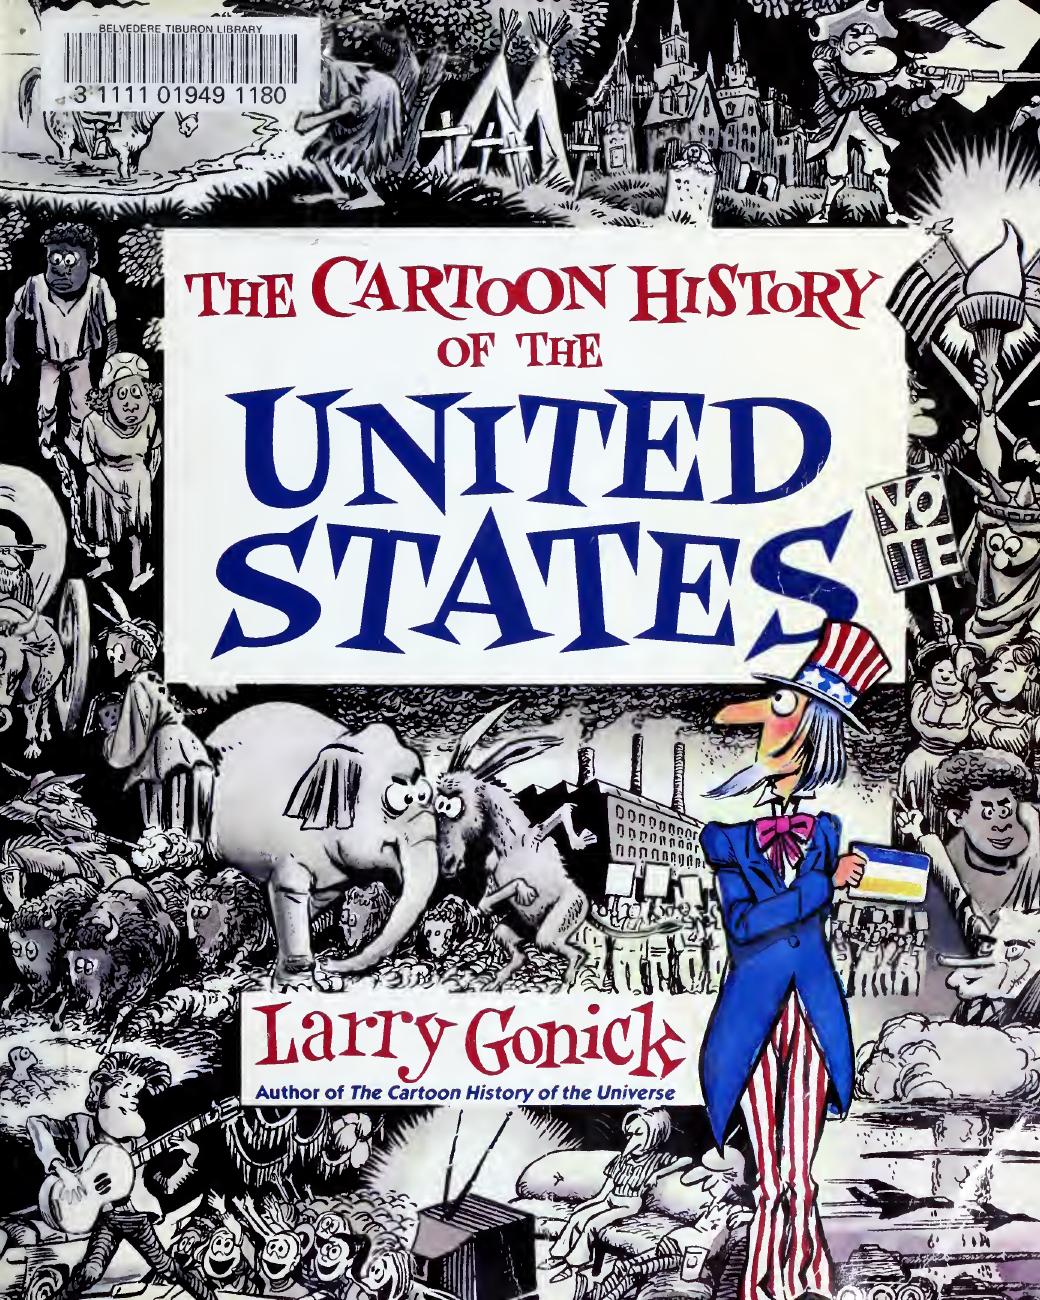 Cartoon History of the United States by Larry Gonick